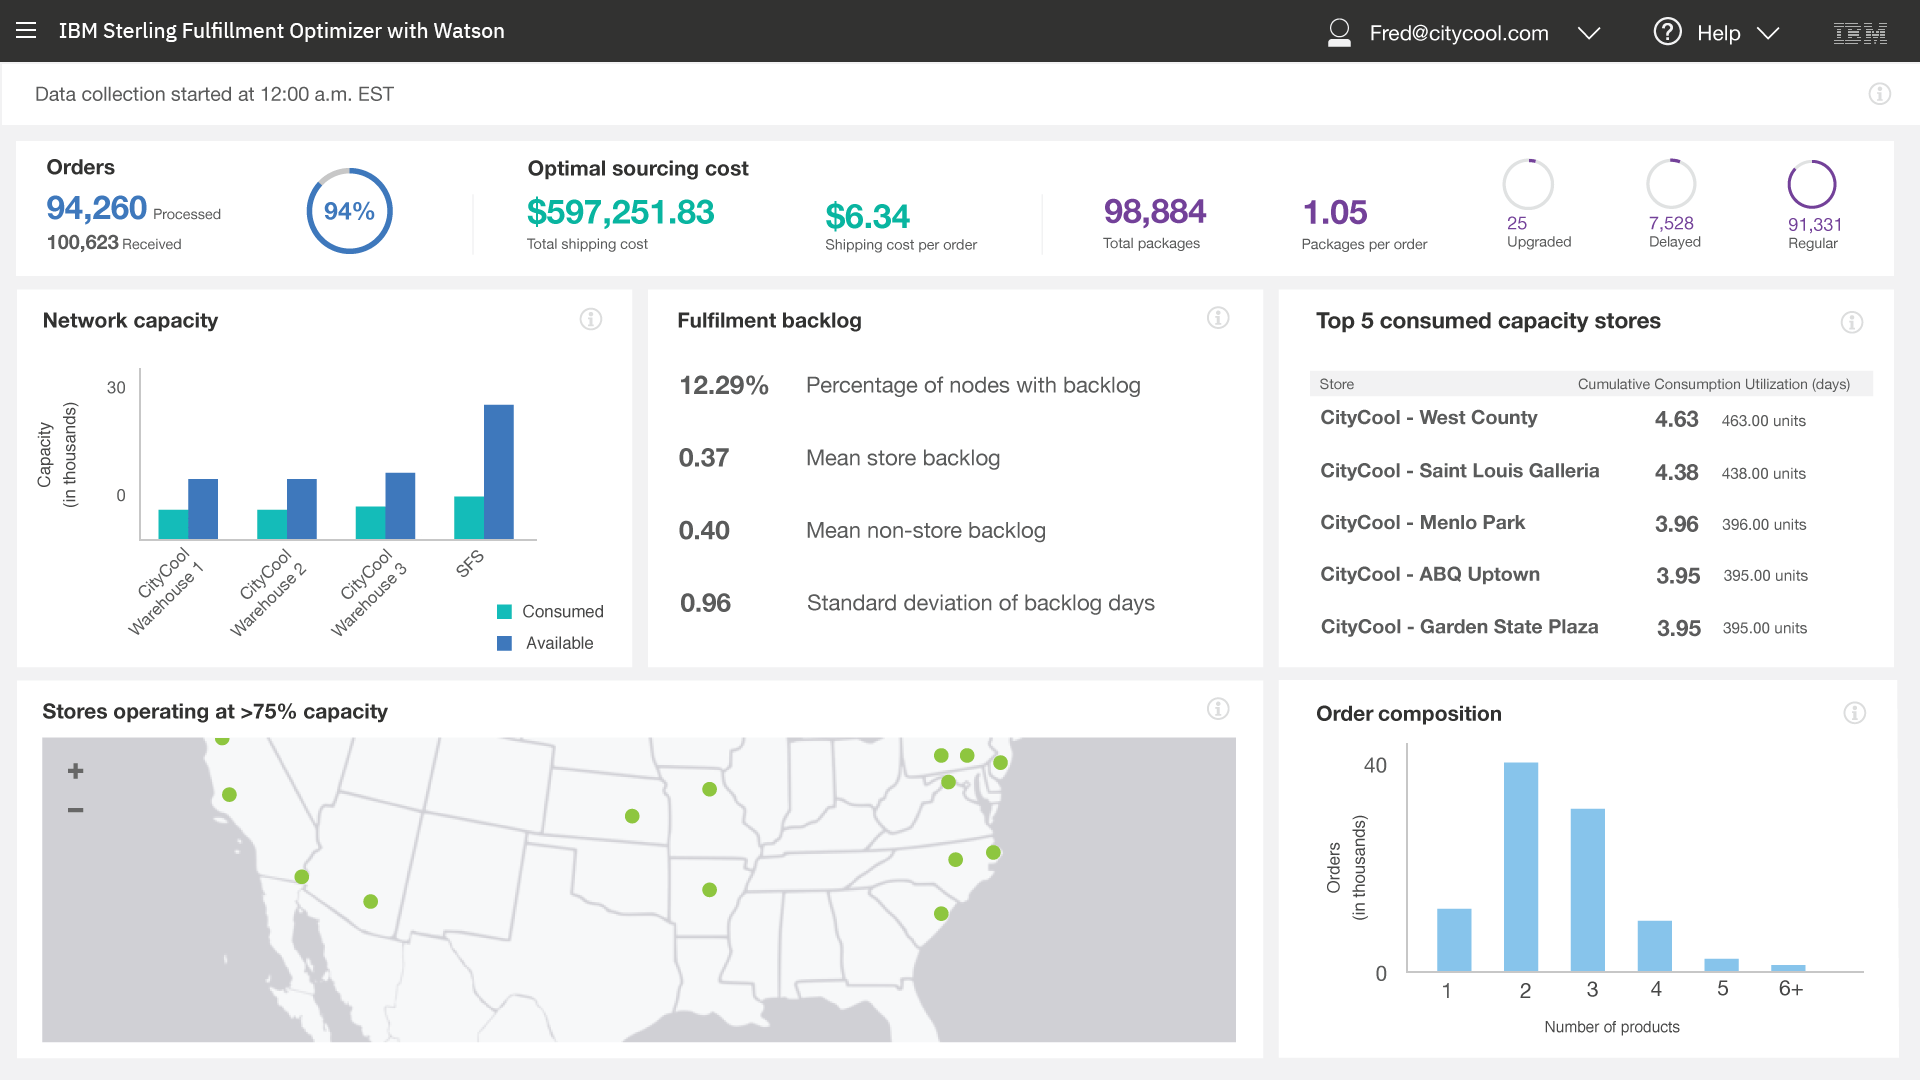 Screenshot of the IBM Sterling Fulfillment Optimizer with Watson operations dashboardt